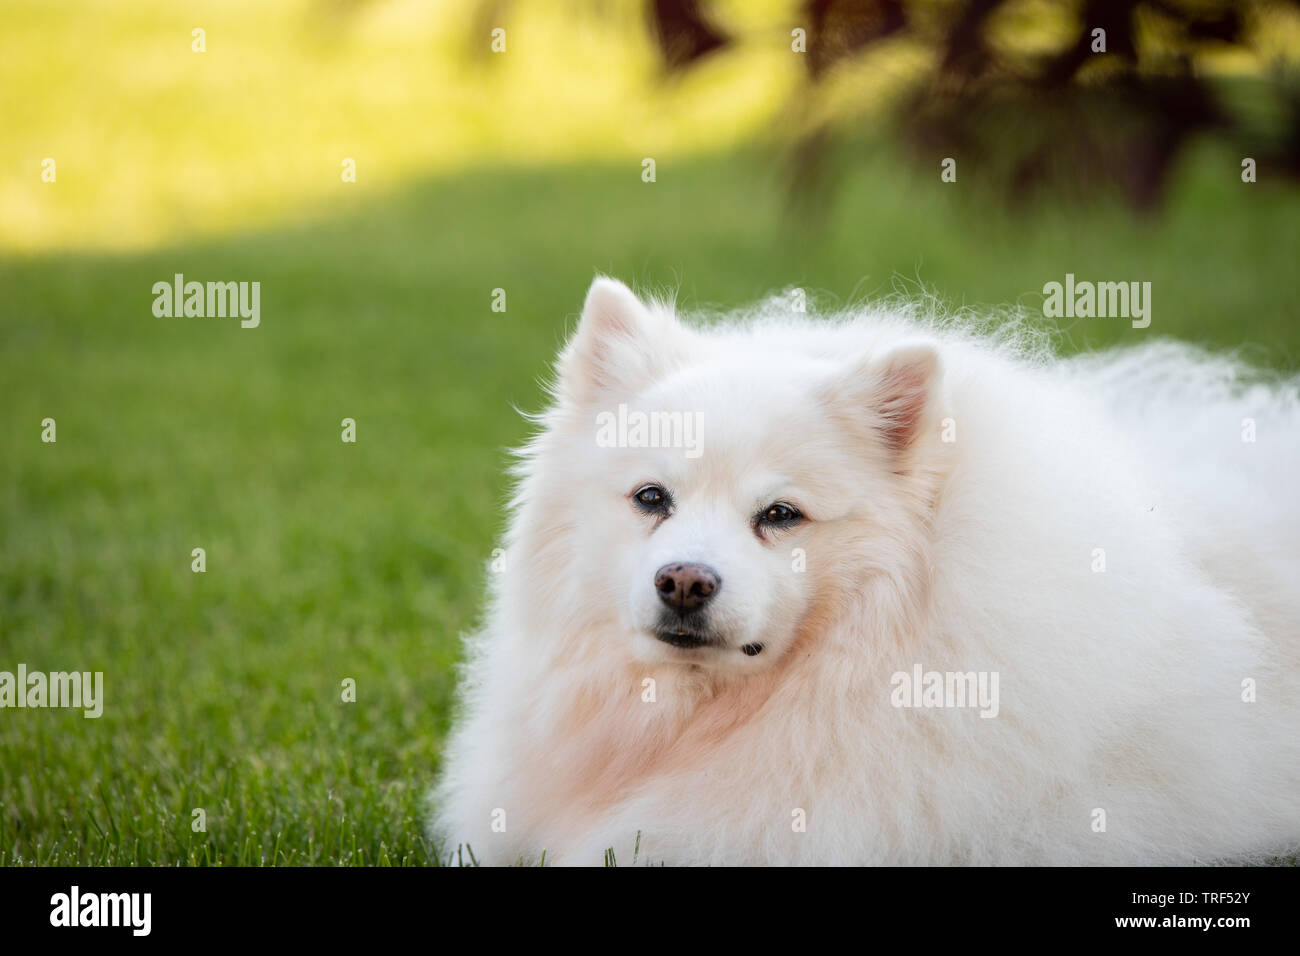 A portrait of an American Eskimo dog. These dogs are a member of the Spitz family, originating in Germany. Stock Photo